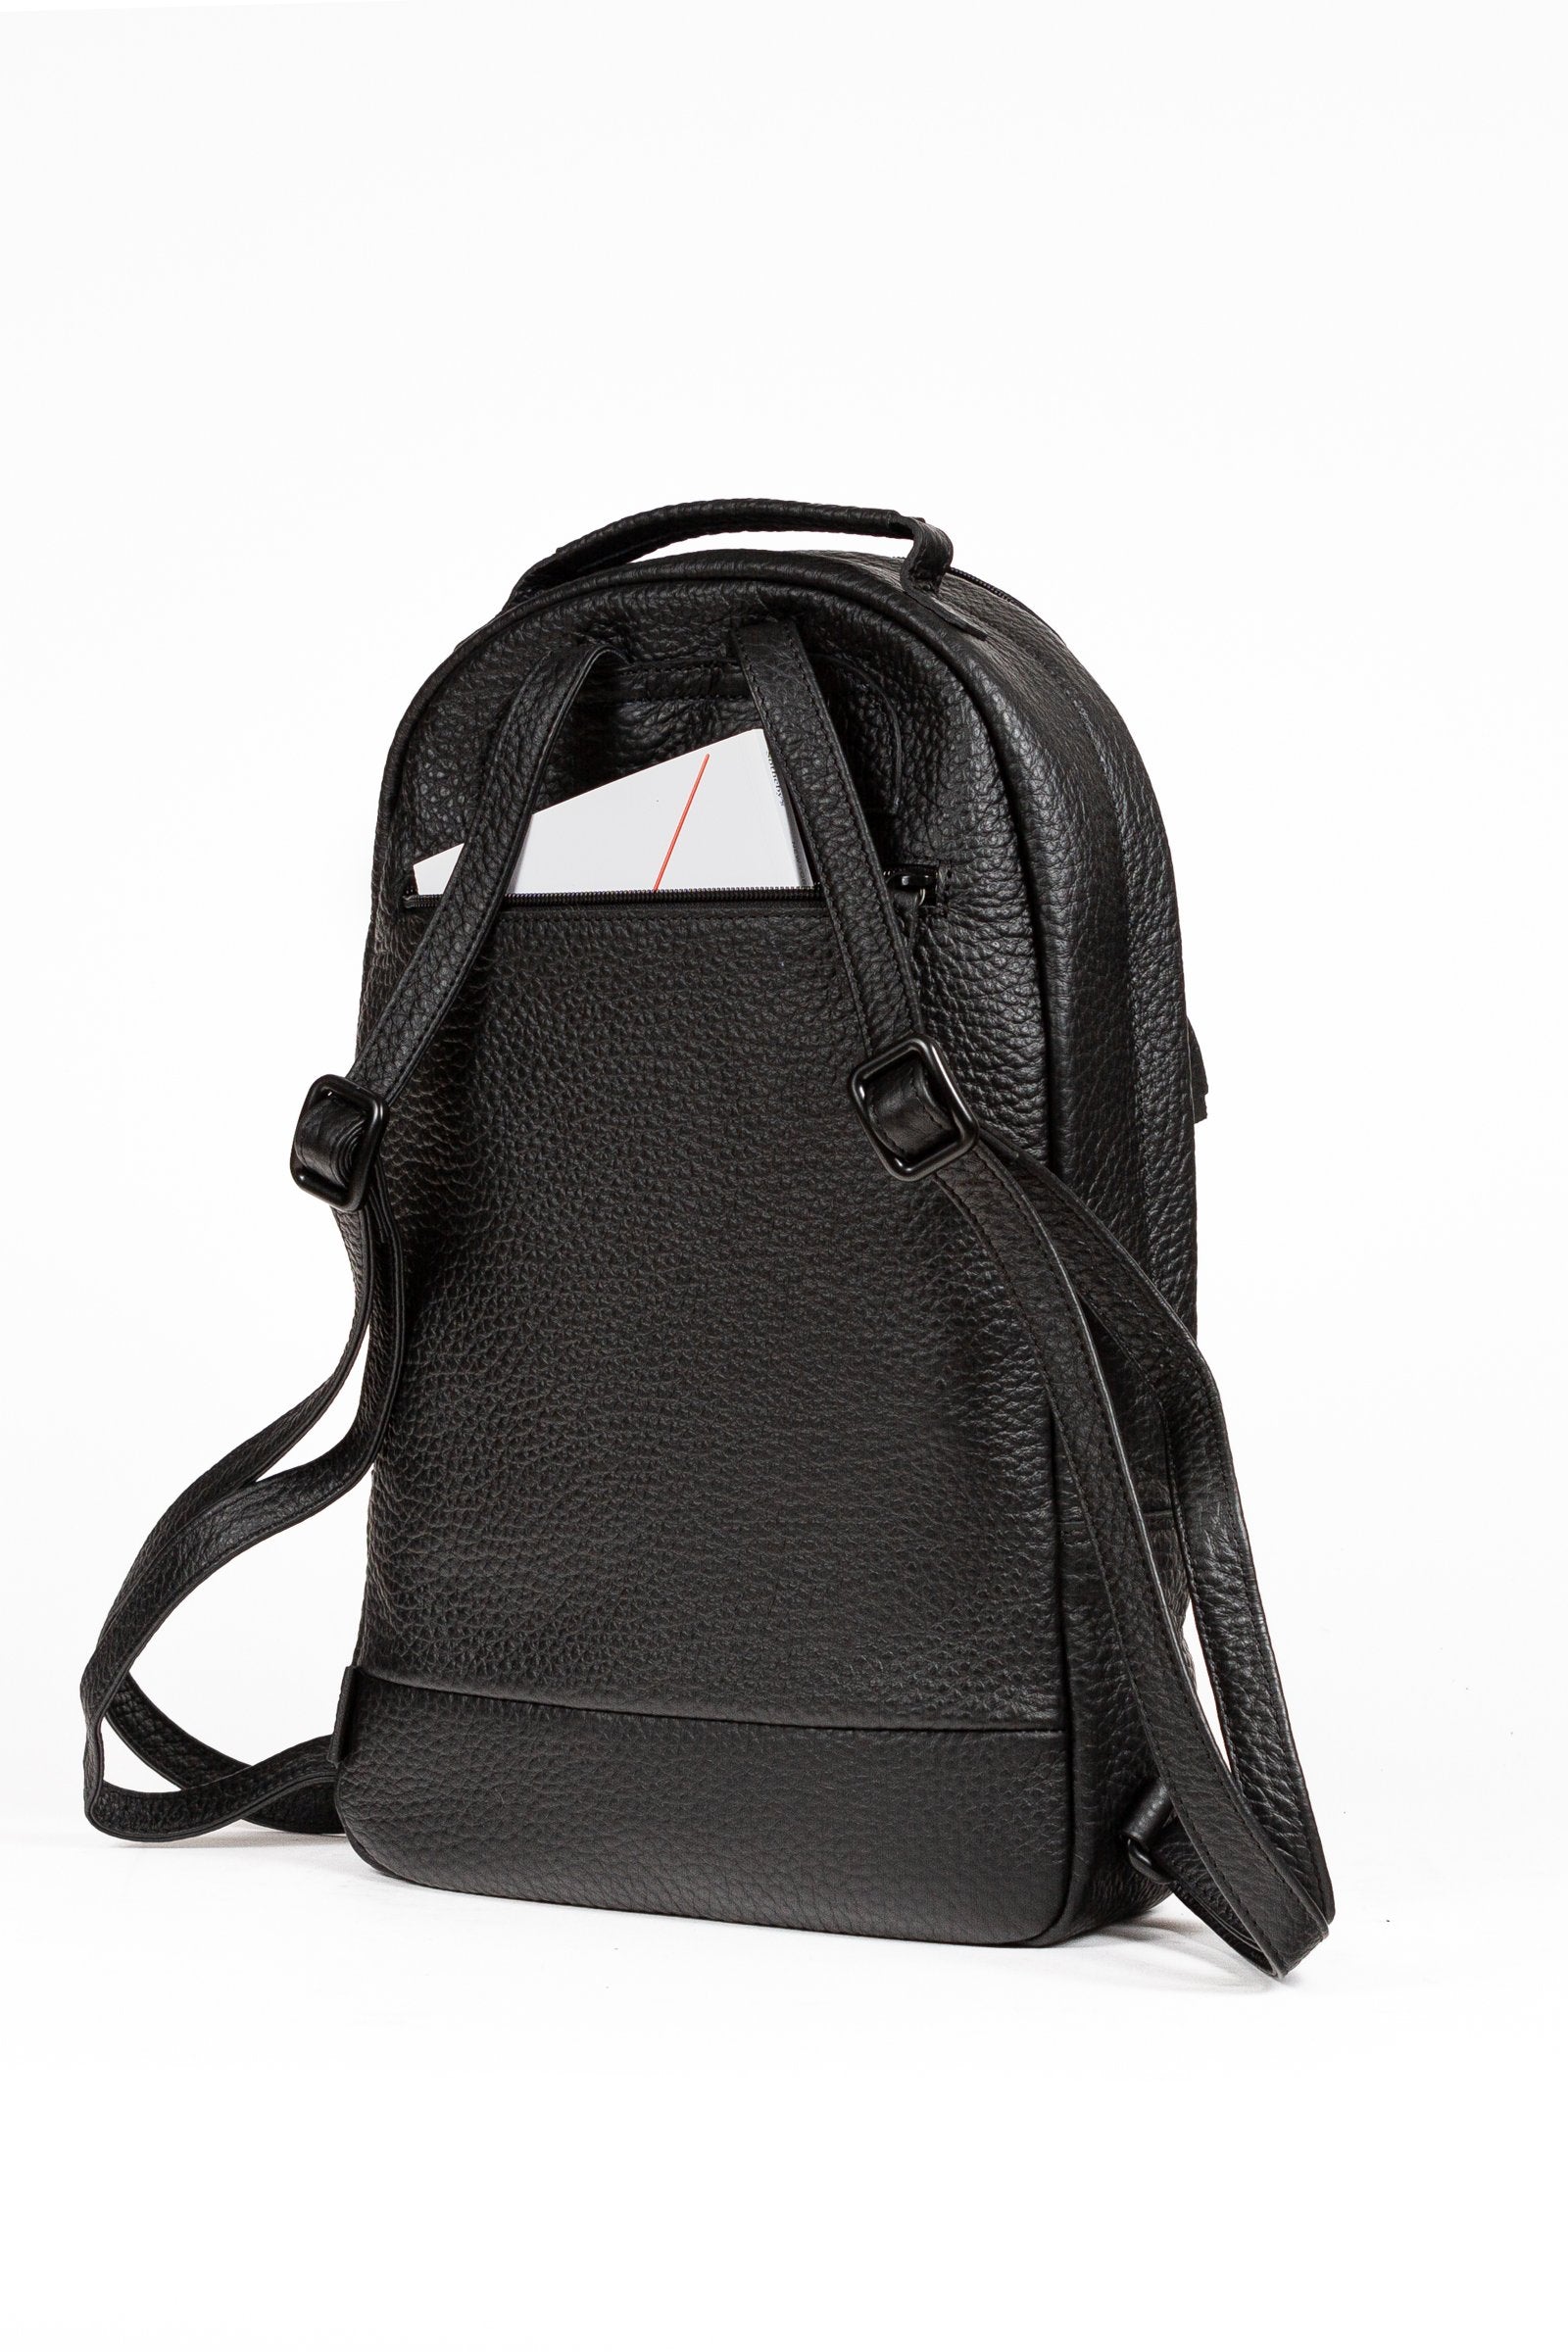 BEON.COM.AU The Jost Kopenhagen Small Backpack is a leather bag made in Europe from premium European leathers and fabrics. Coarsely milled cowhide Backpack padded compartment 19cm x 23cm x 1.5cm Zipper pocket, plug-in and card compartment and key holder 1 main compartment, fits A4 documents, closes with two-... Jost at BEON.COM.AU